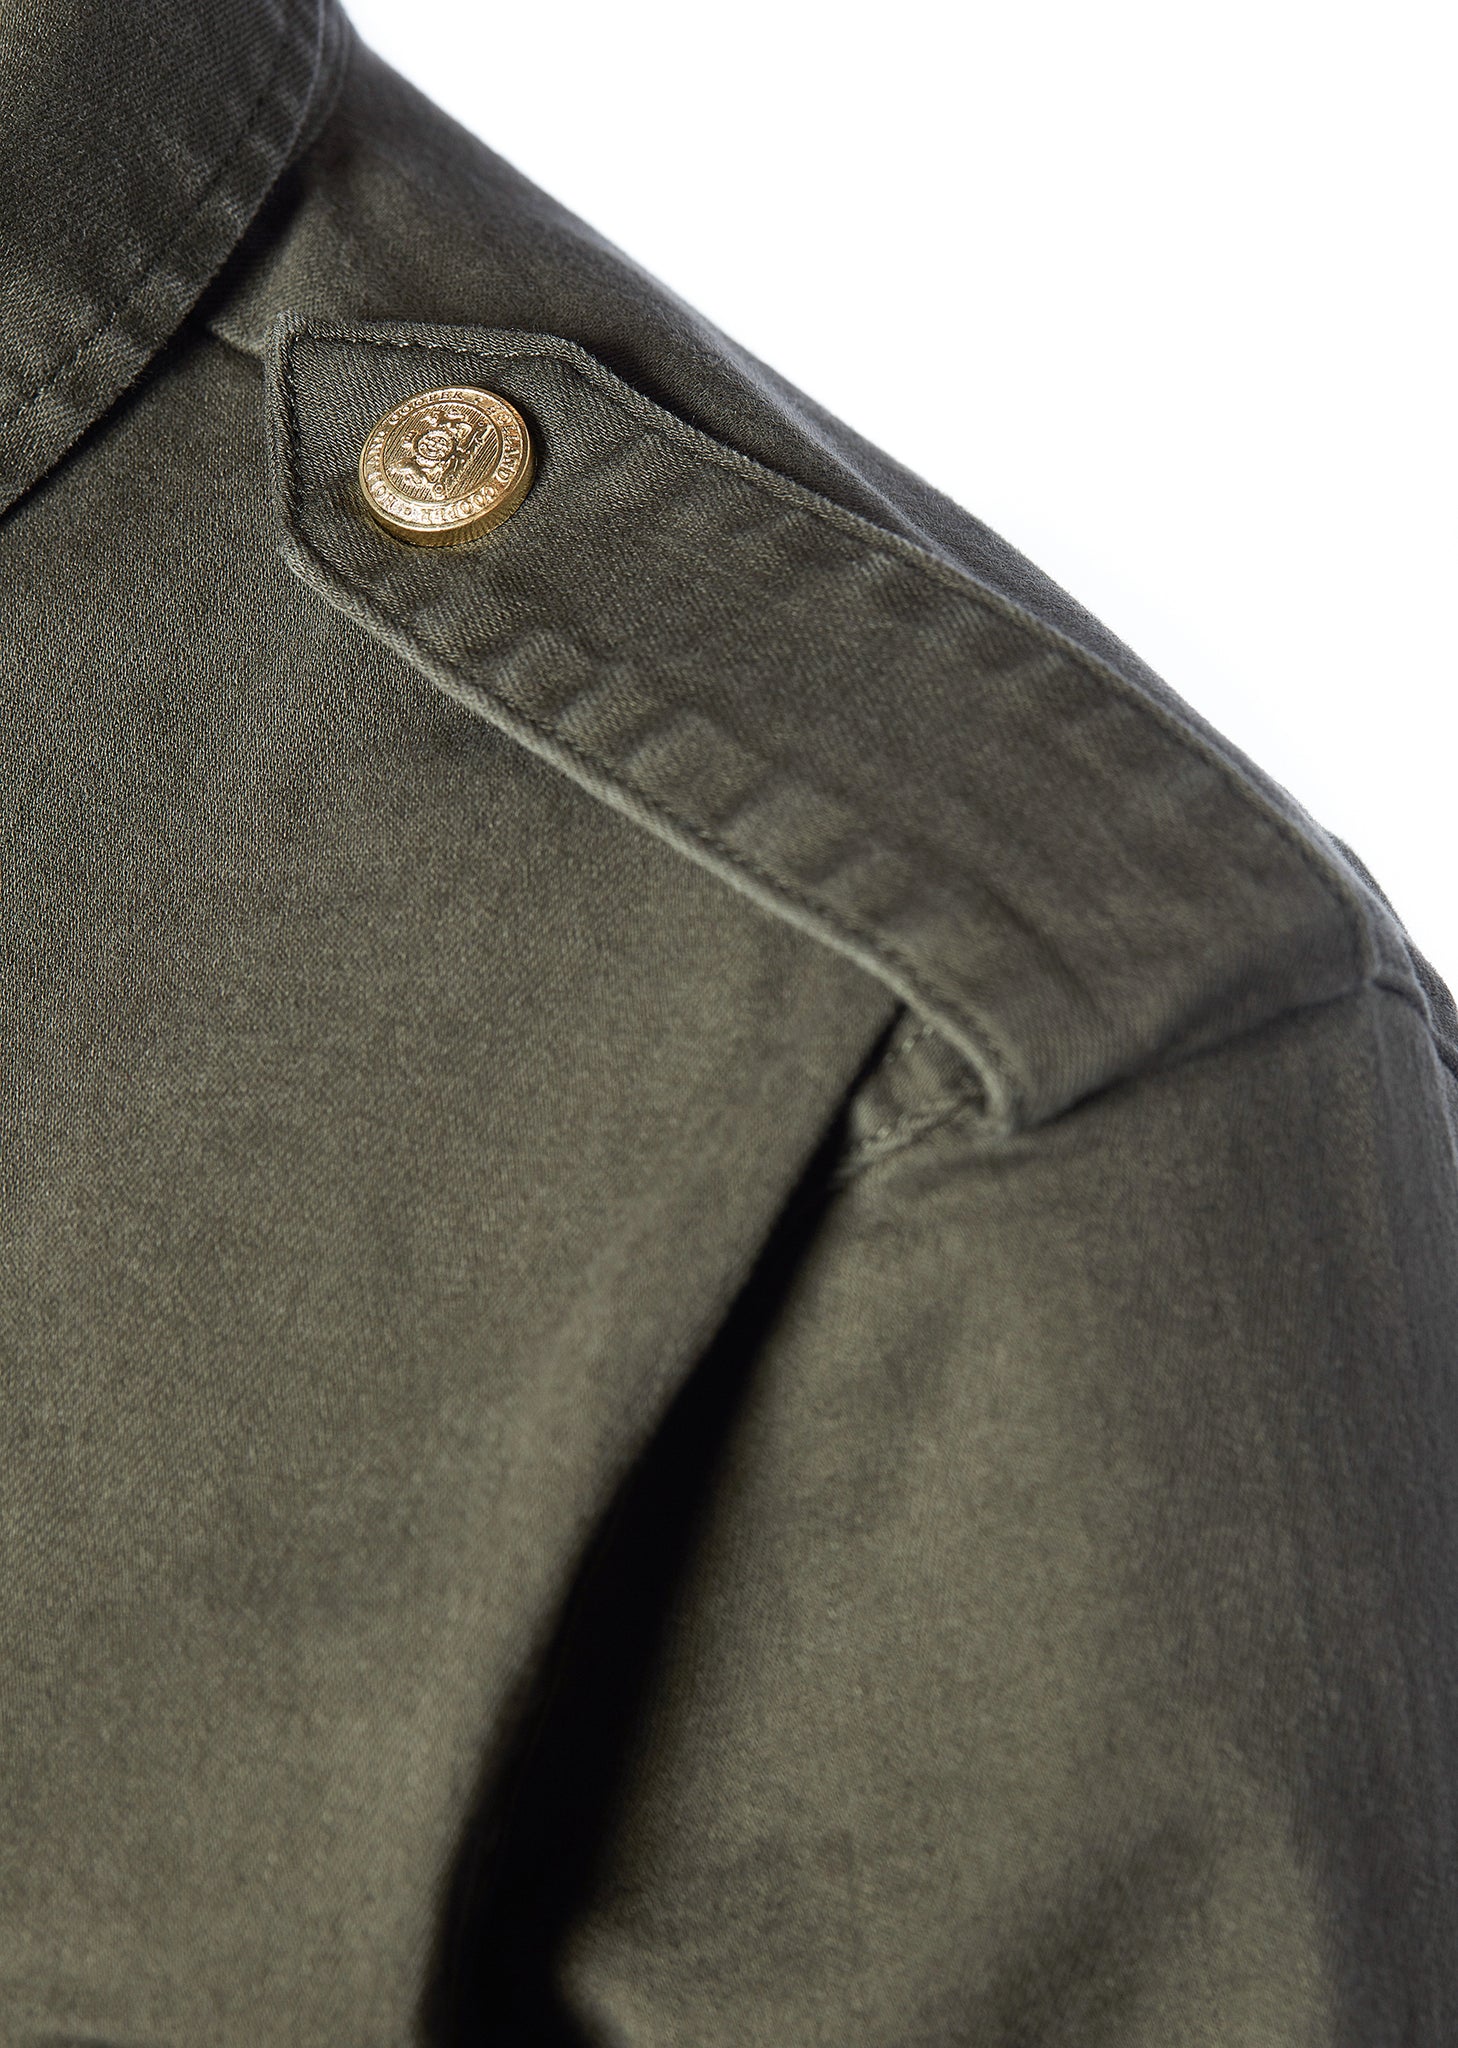 epaulette detail on Relaxed fit collared artillery style jacket in khaki with four pockets two chest ones being box pleated  and two hip being patch pockets with gold jean button fastenings adjustable long sleeves and epaulette shoulder detail